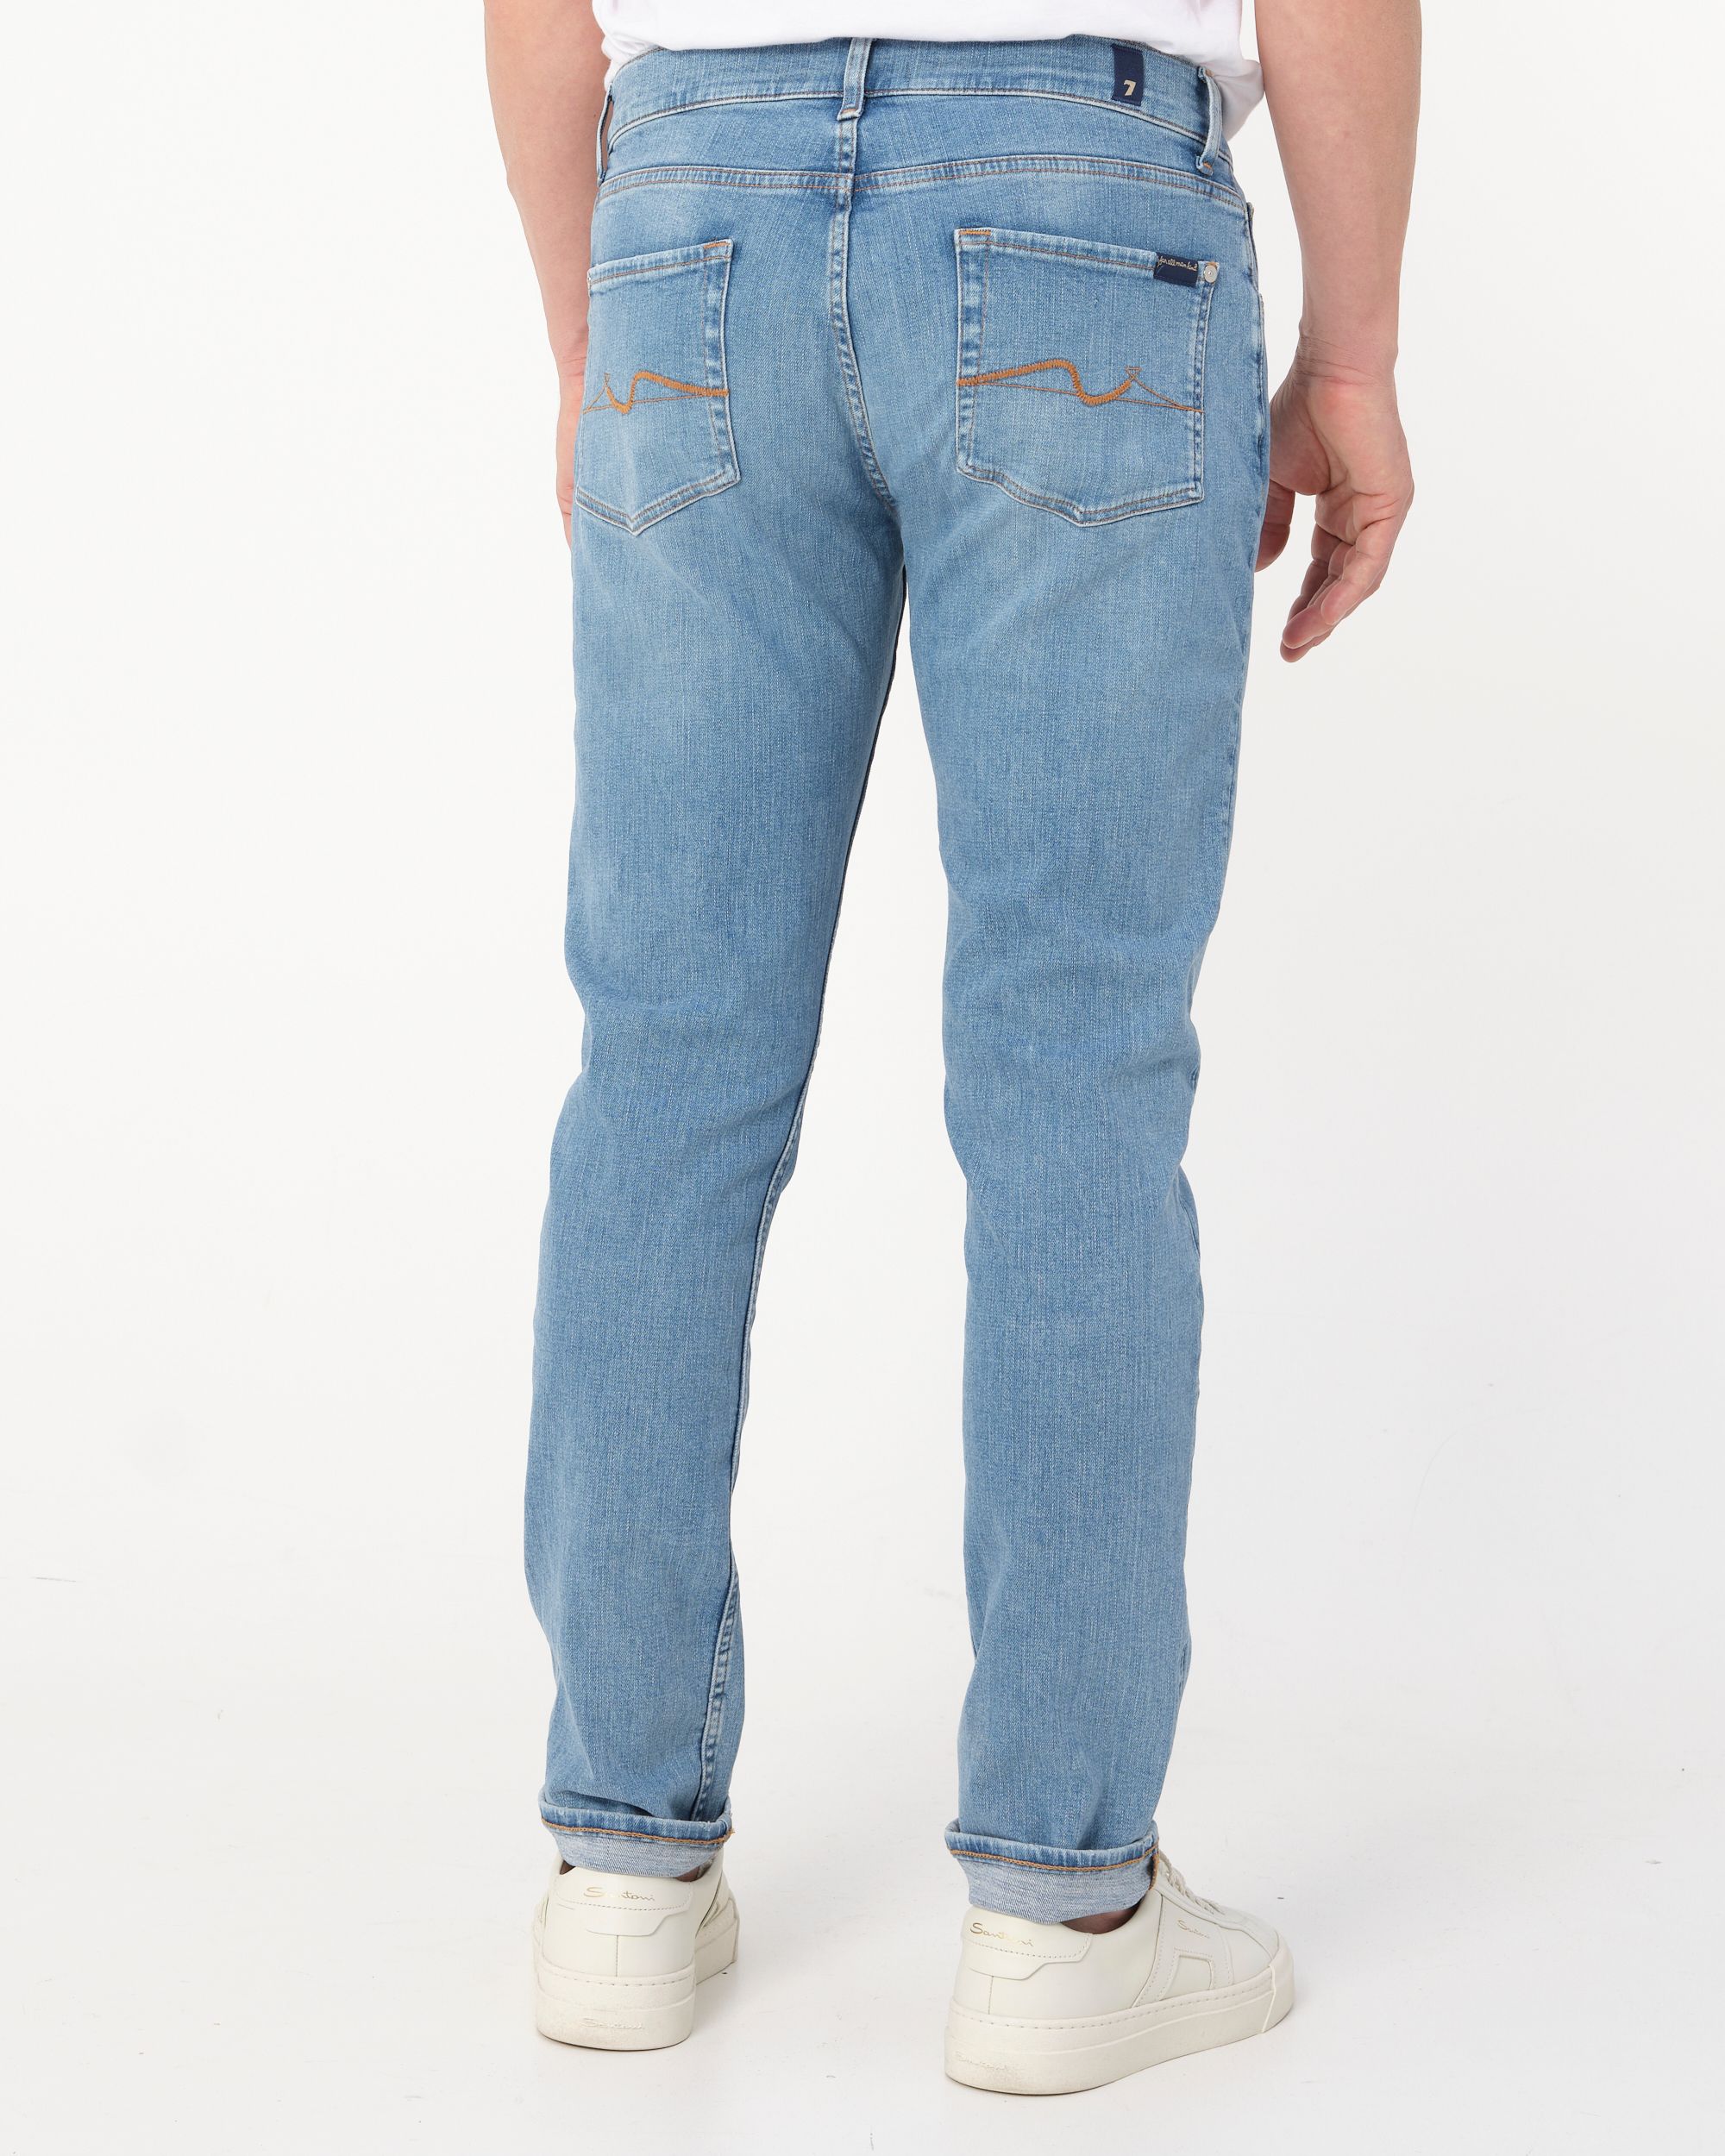 Seven for all mankind Jeans Blauw 091552-001-30